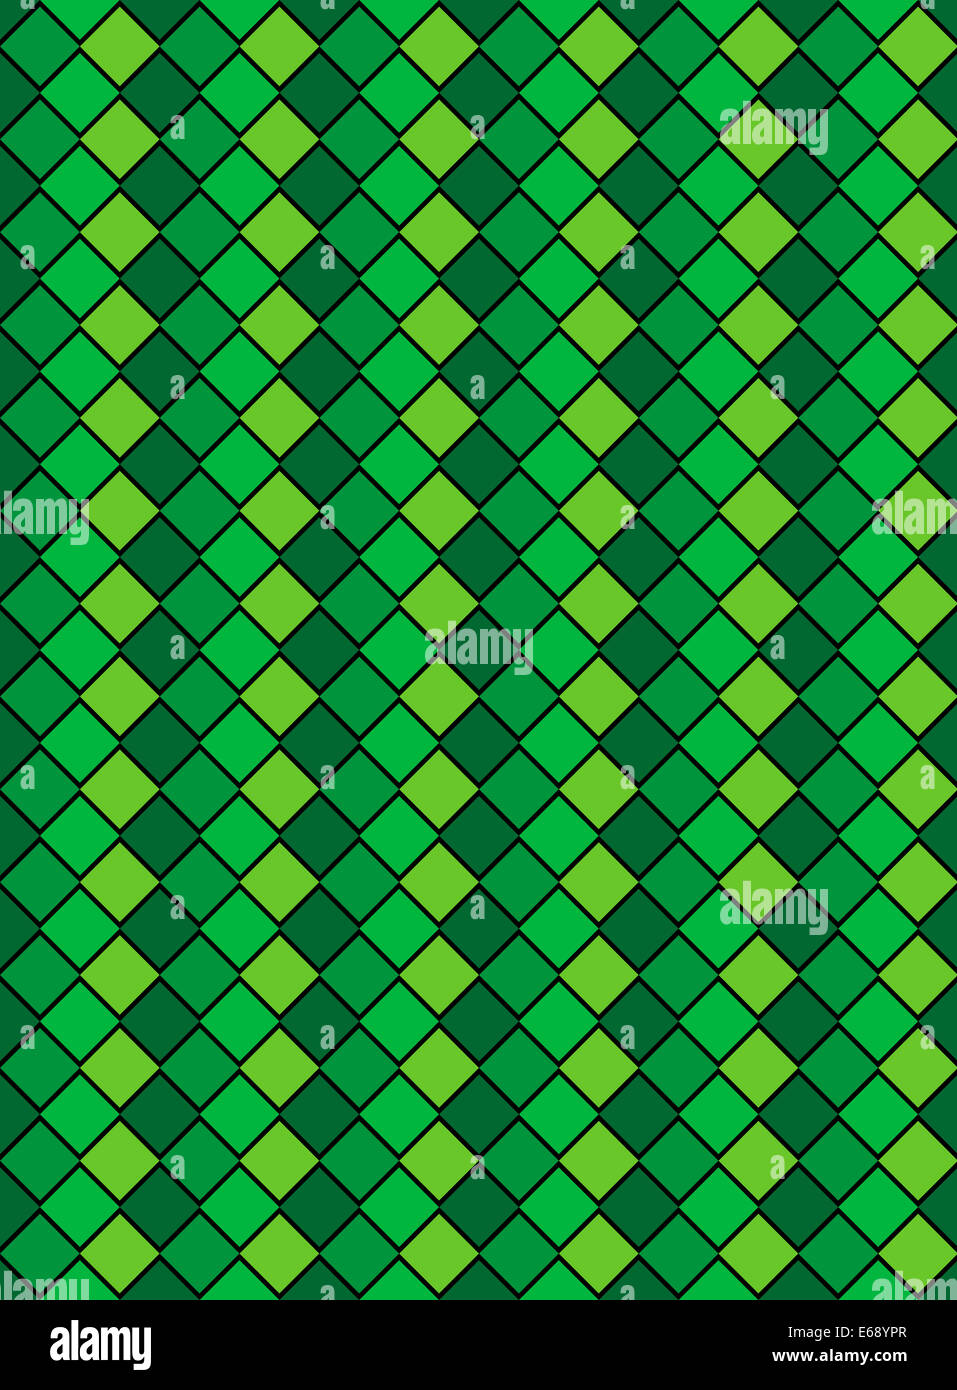 Four tones of green variegated diamond snake style wallpaper texture pattern. Stock Photo